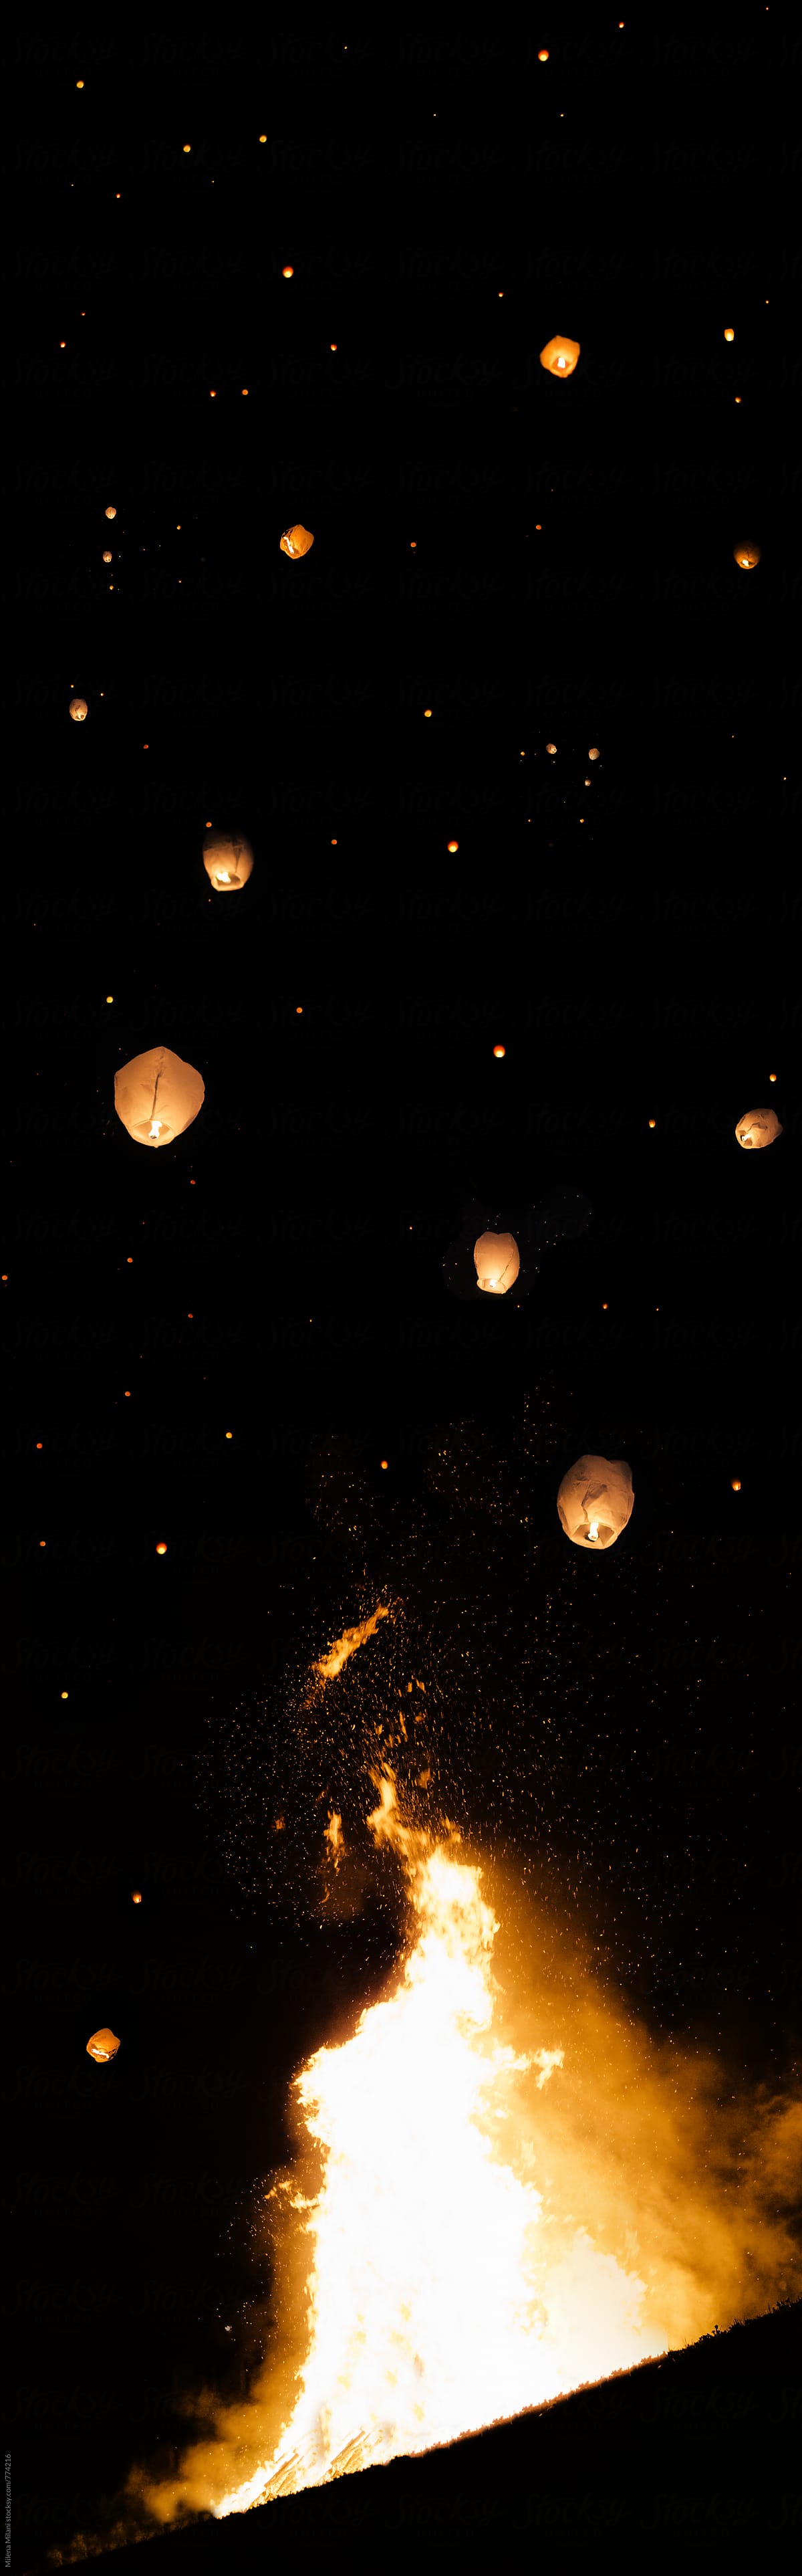 fire and sky lanterns